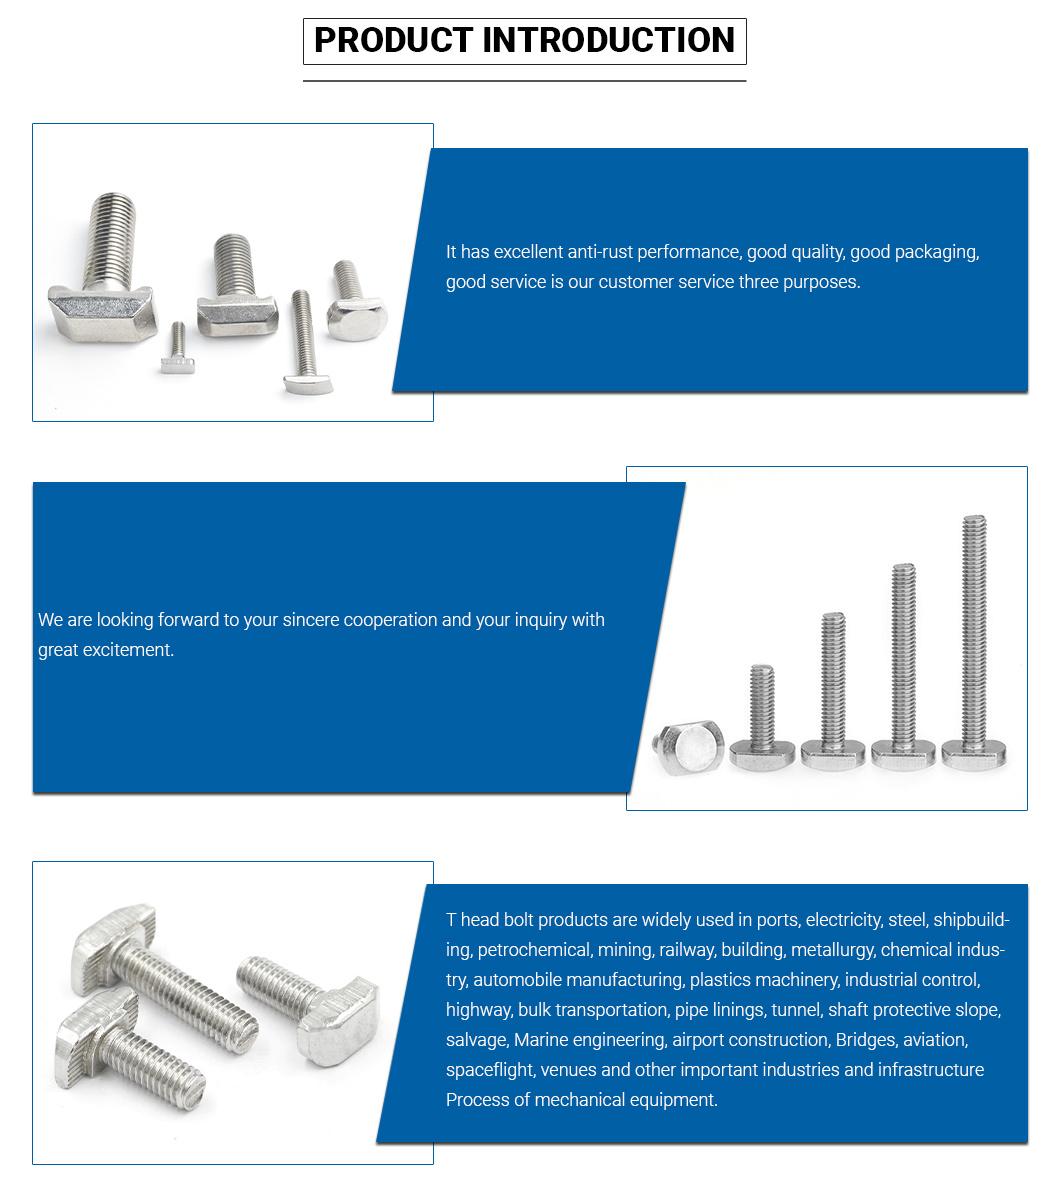 Square Head Stainless Steel 304 T Head Bolt A2 T Head Bolt